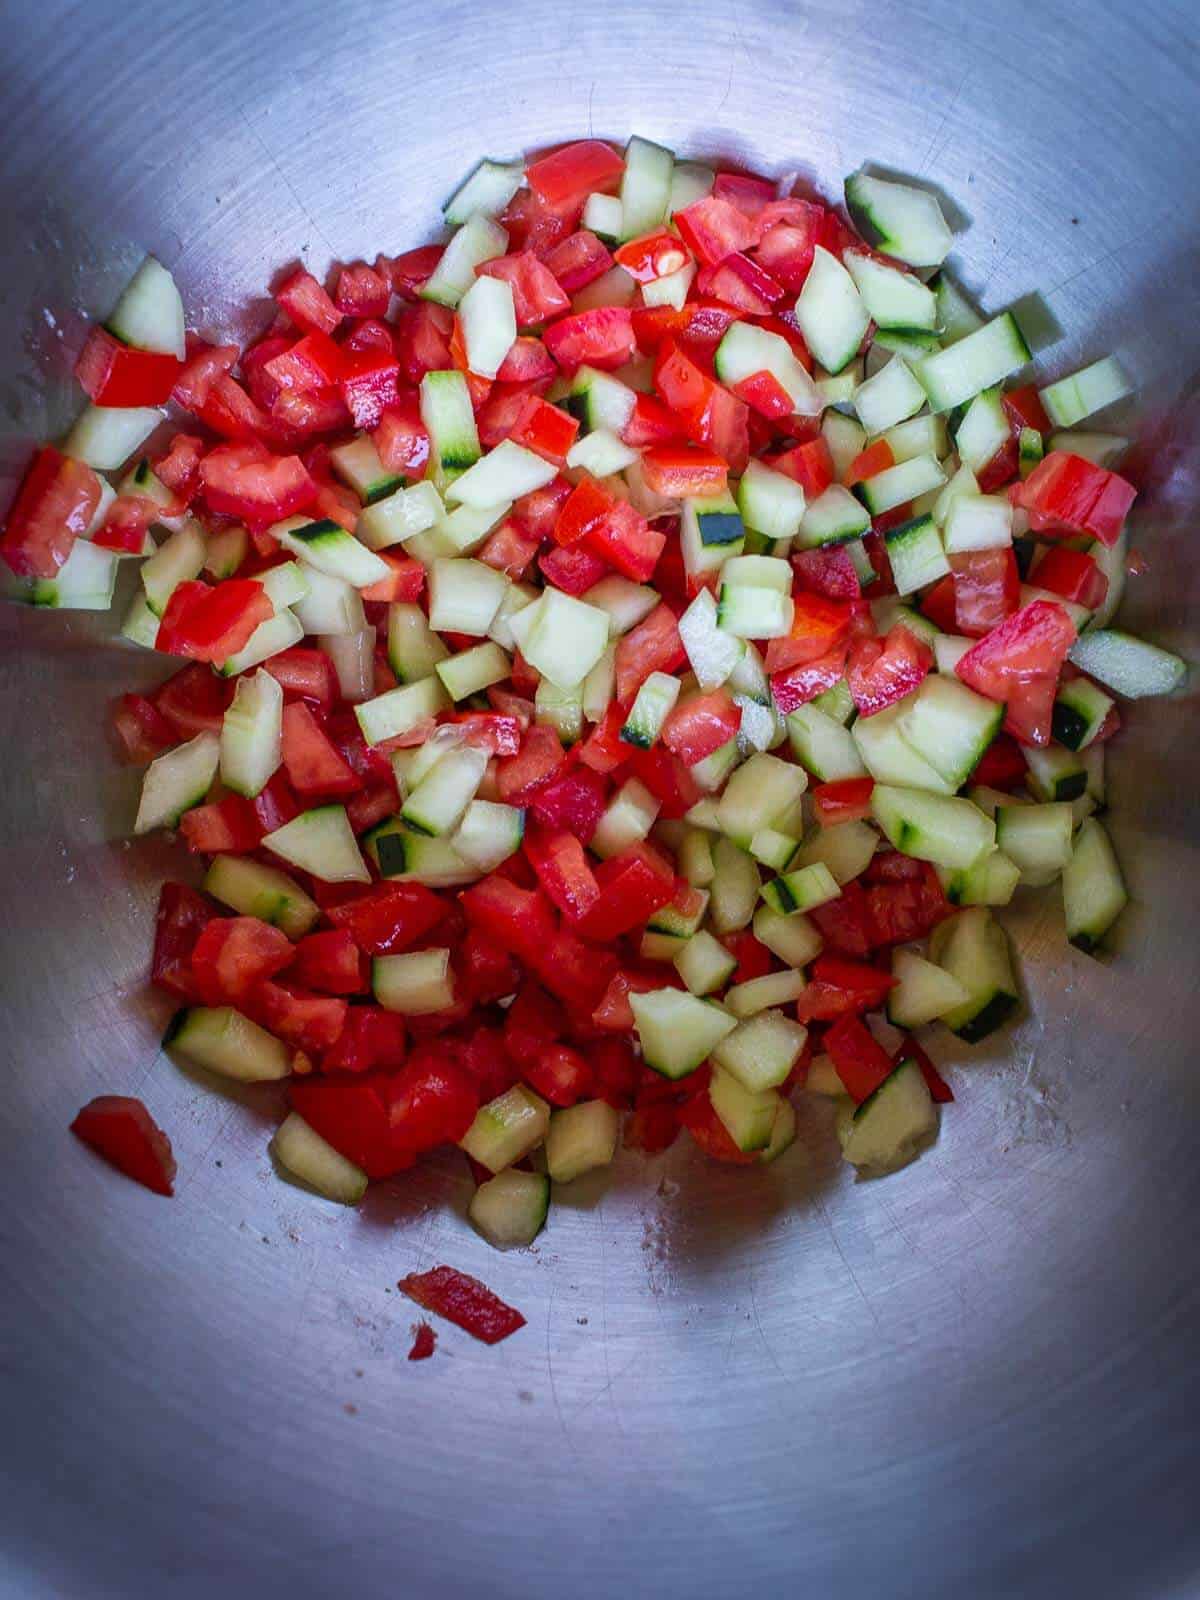 diced tomato and cucumber